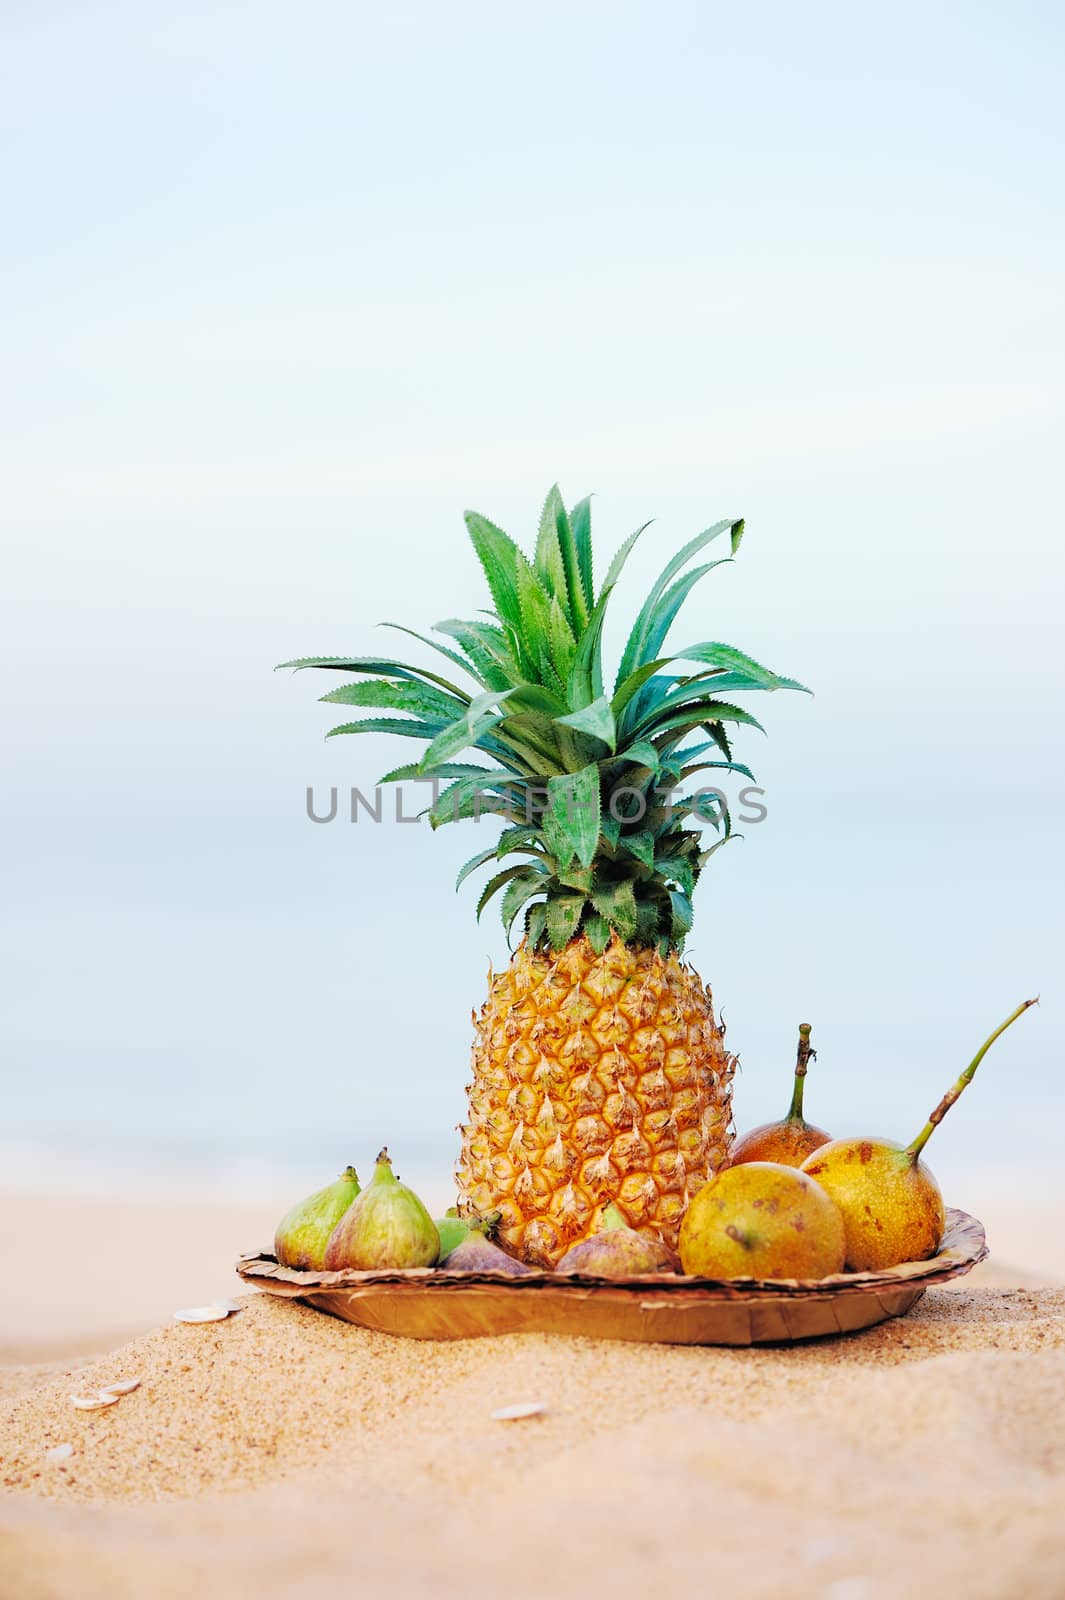 Pineapple on the beach by styf22